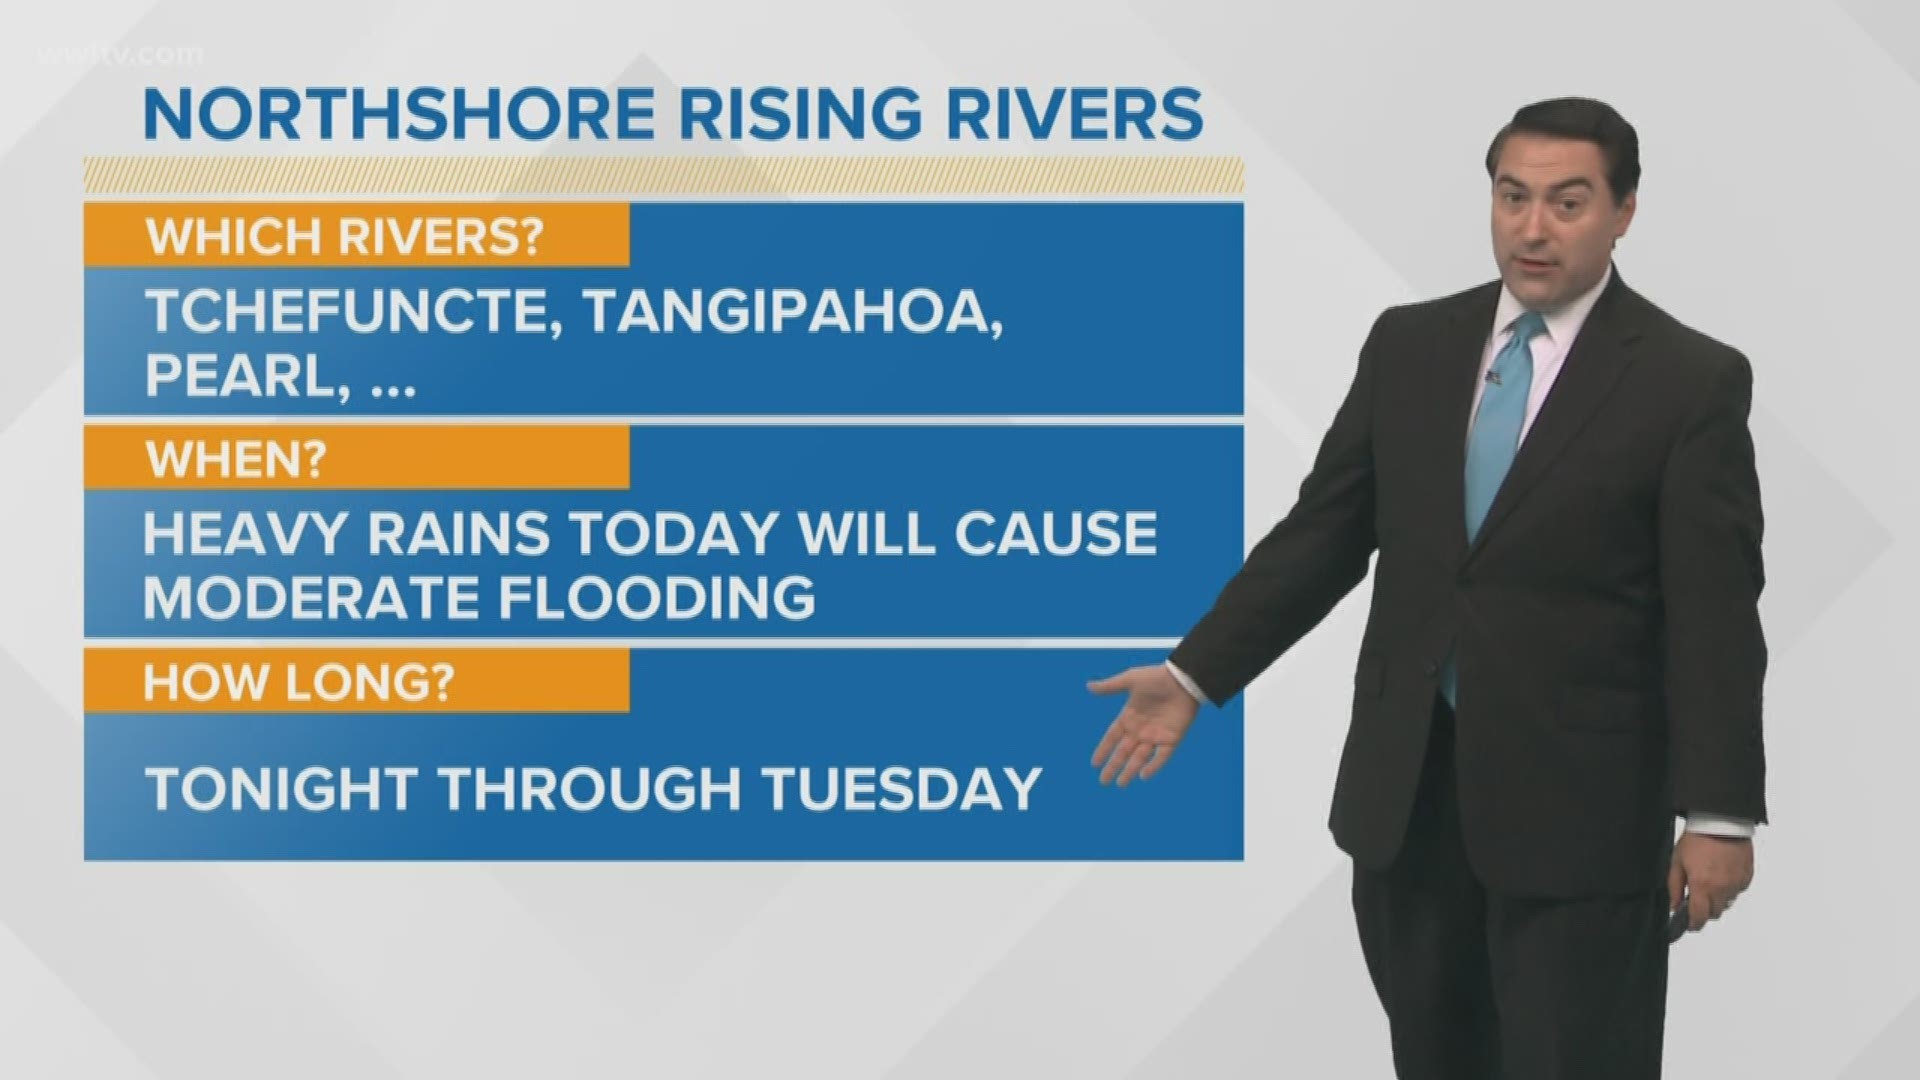 Meteorologist Dave Nussbaum explains the levels they expect the northshore rivers to get to.